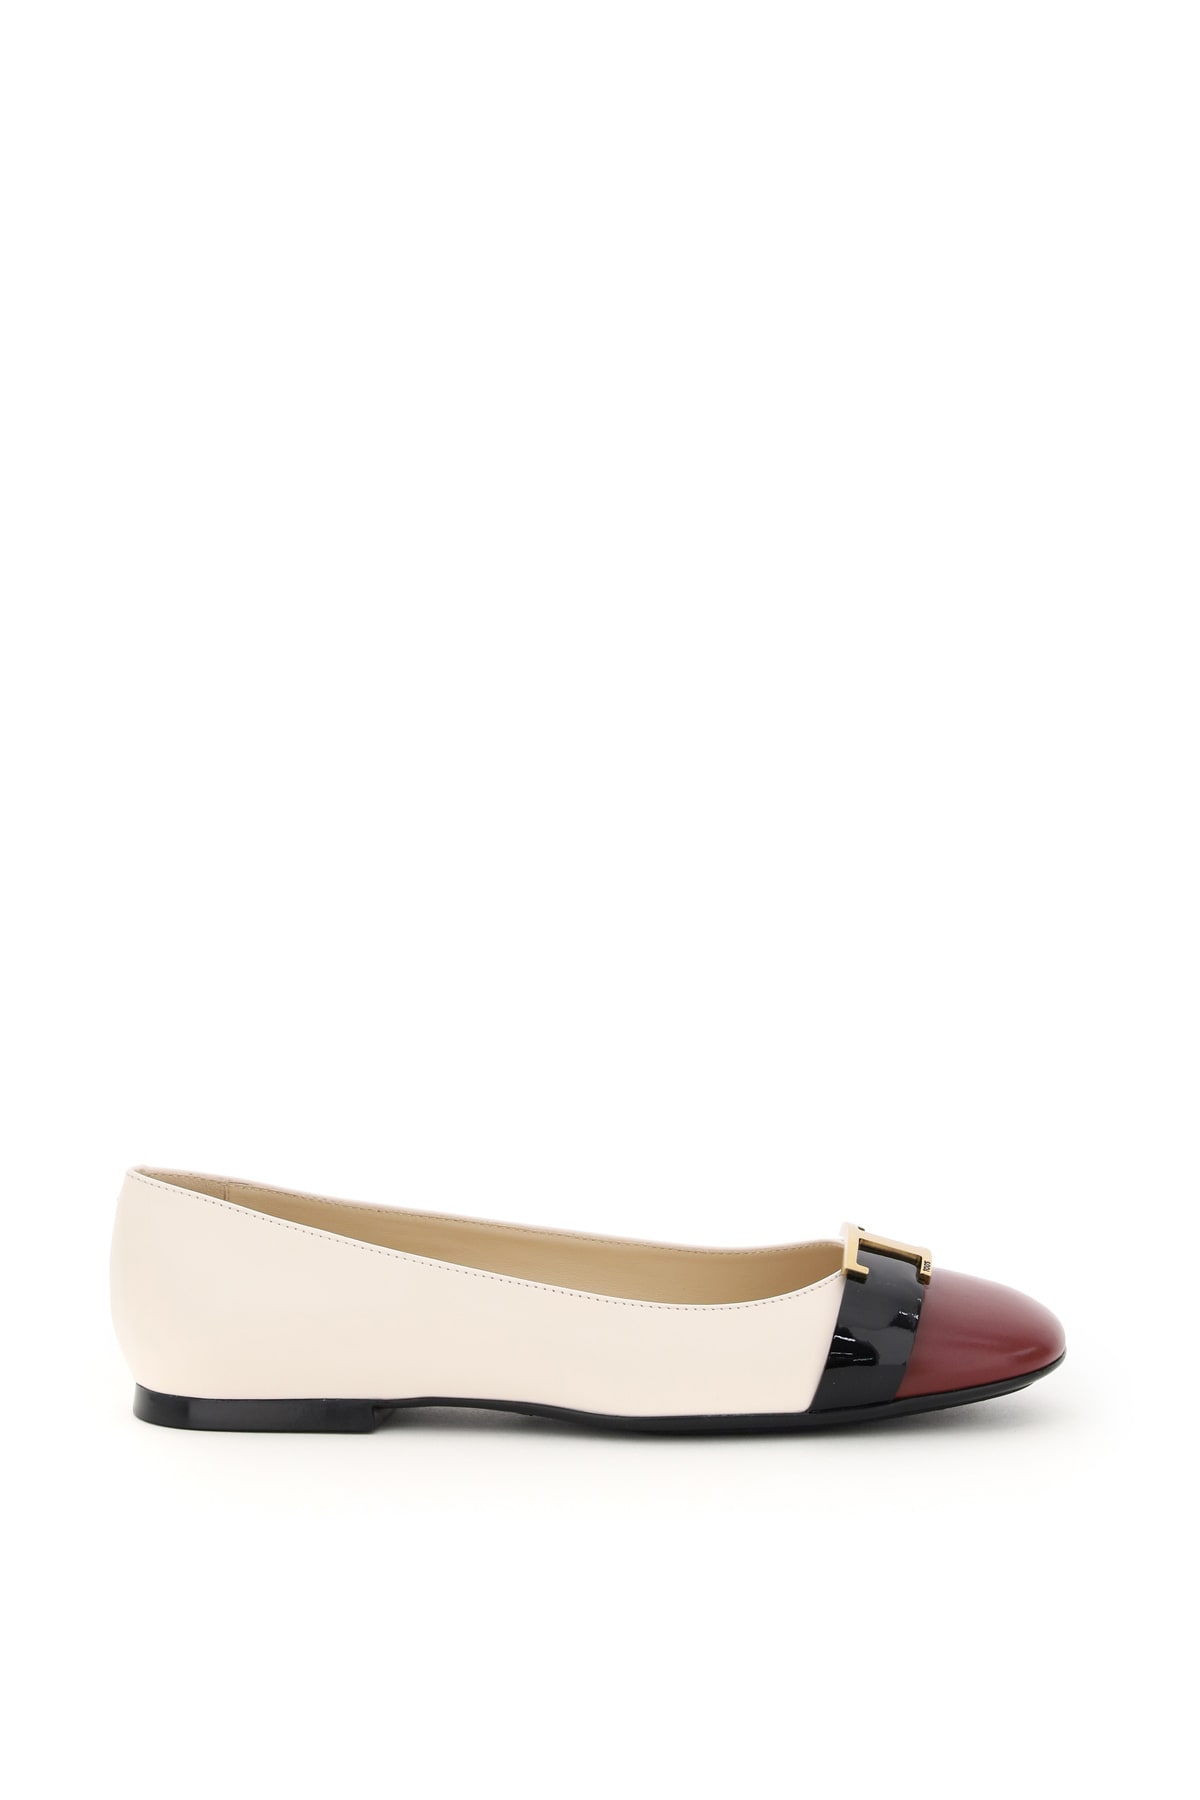 Buy Tods T Timeless Multicolor Ballet Flats online, shop Tods shoes with free shipping